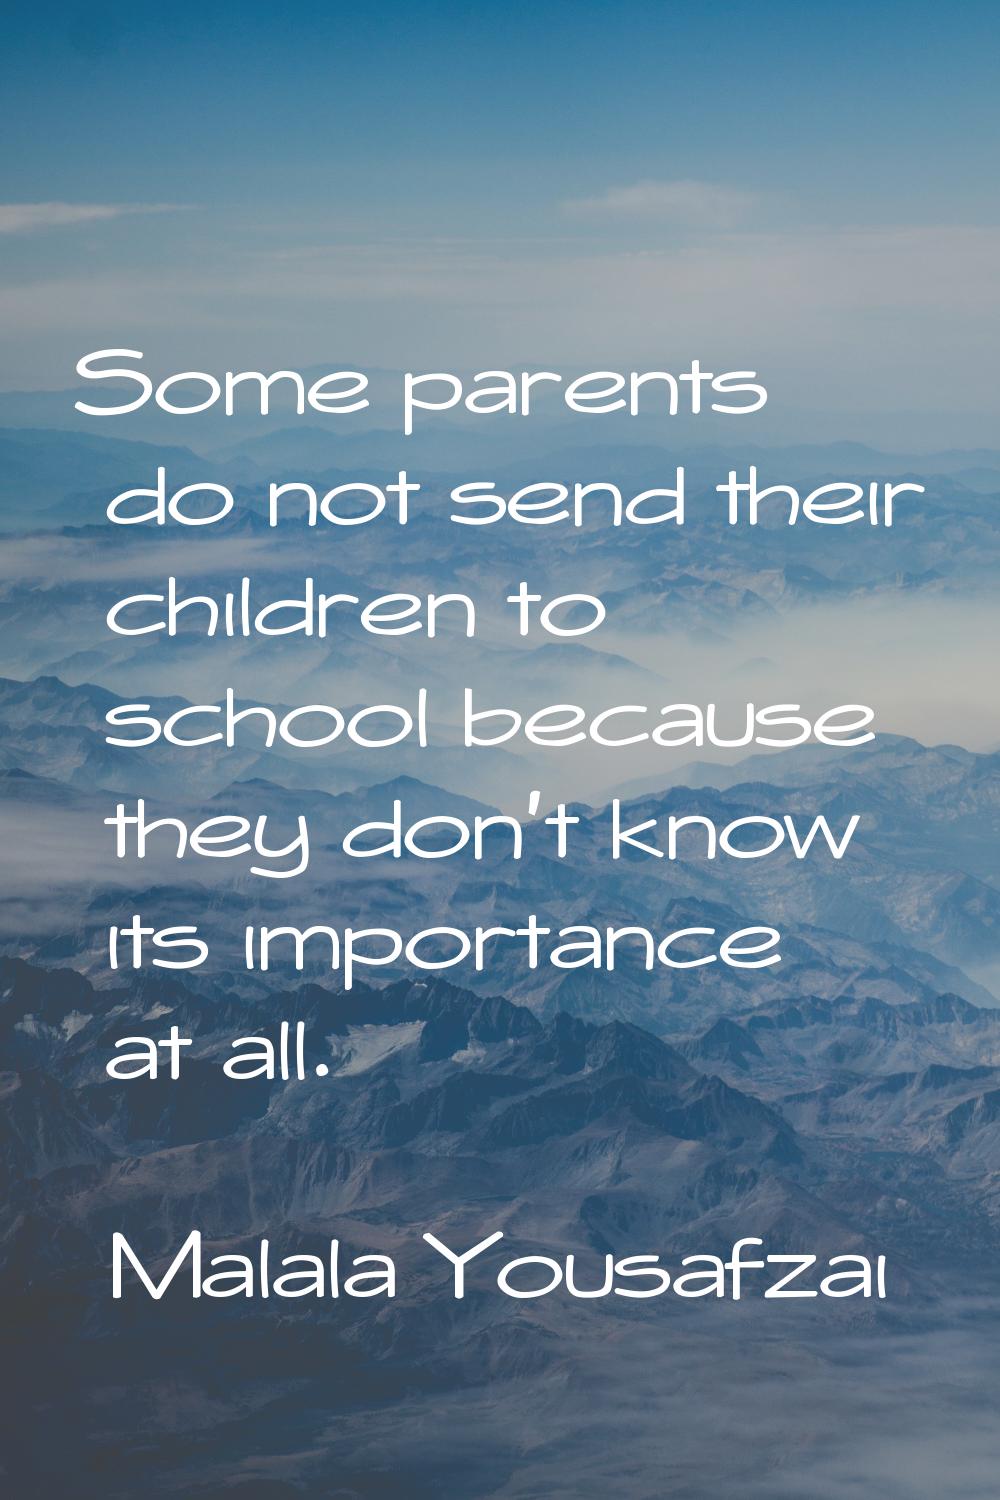 Some parents do not send their children to school because they don't know its importance at all.